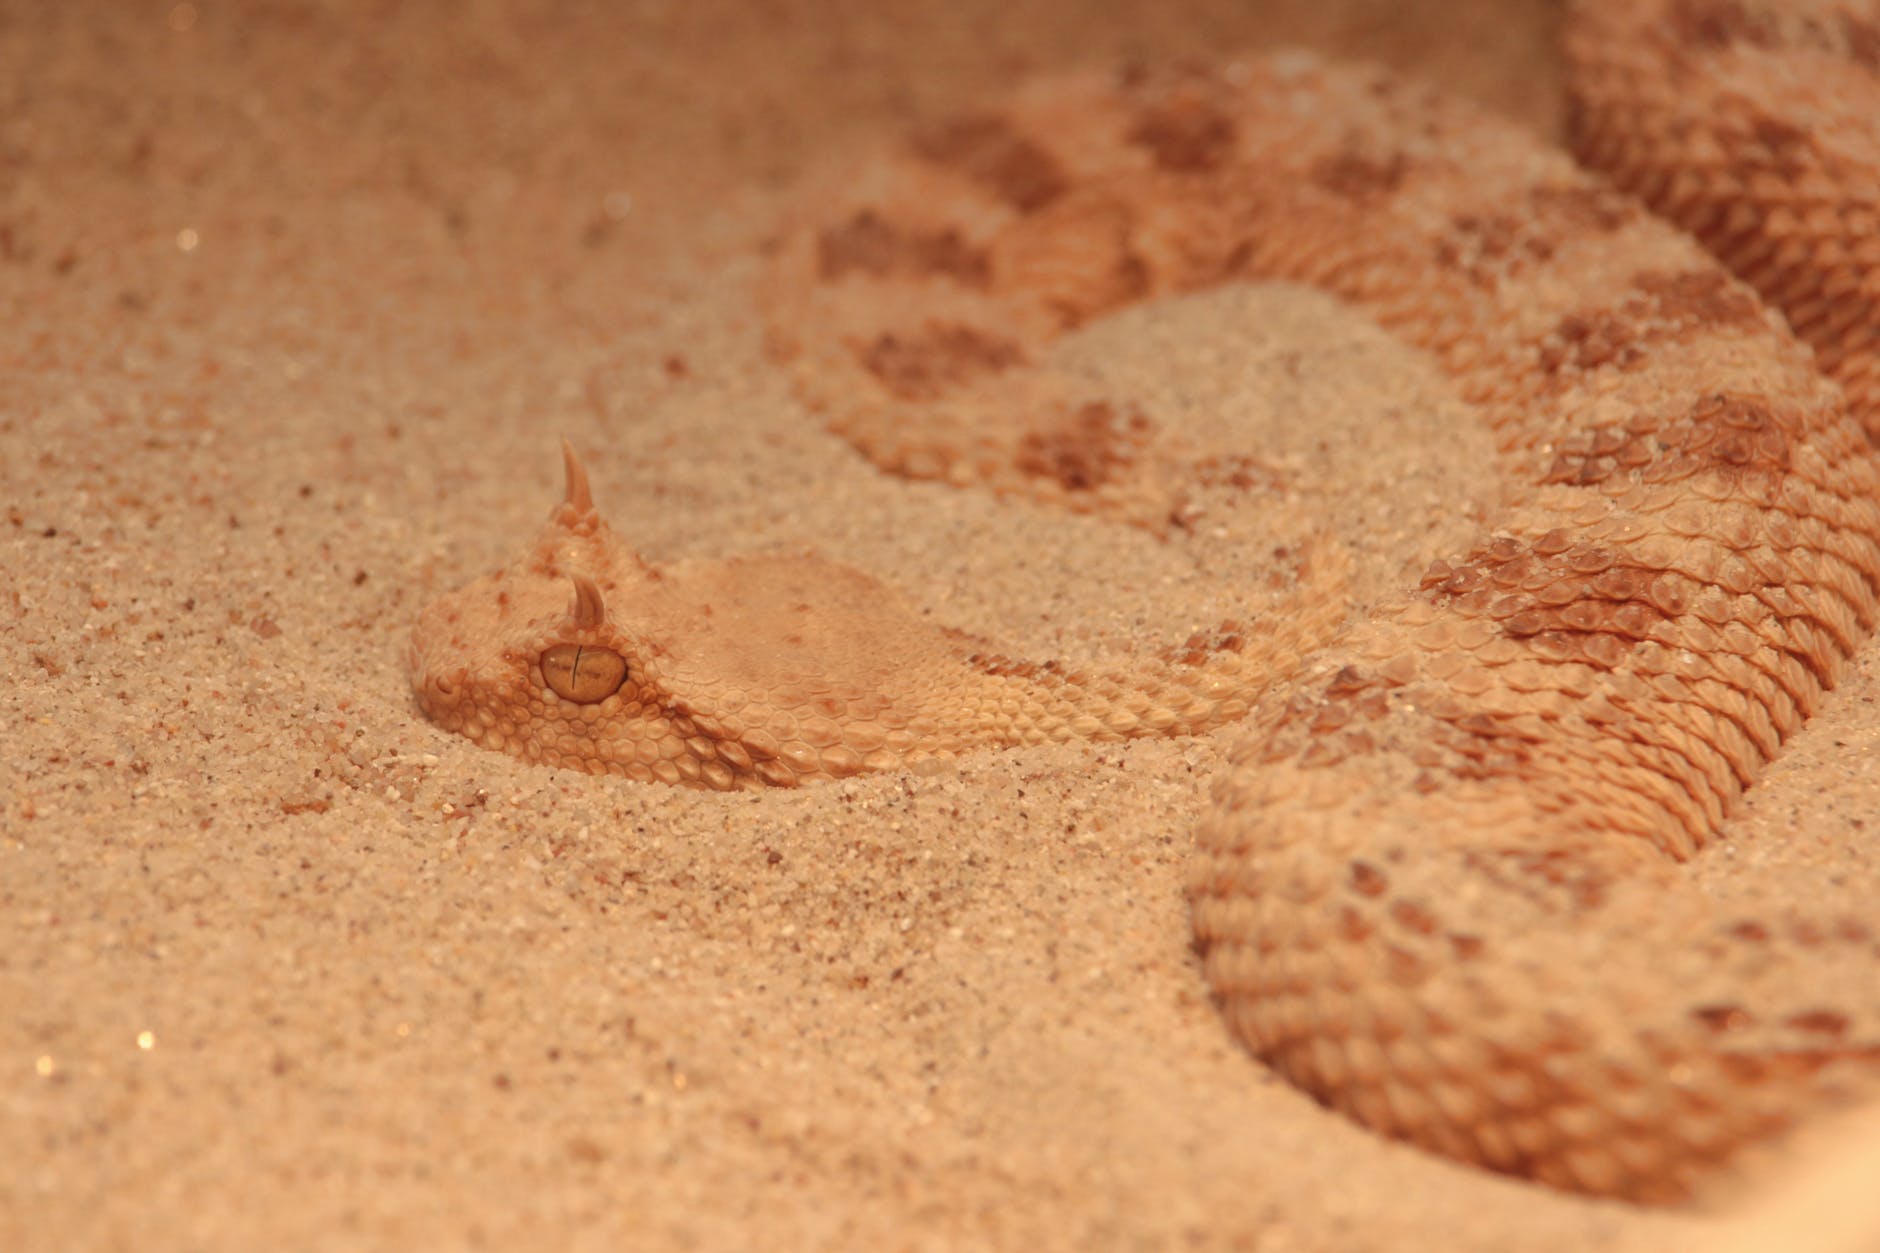 close up photo of a brown sidewinder snake on sand